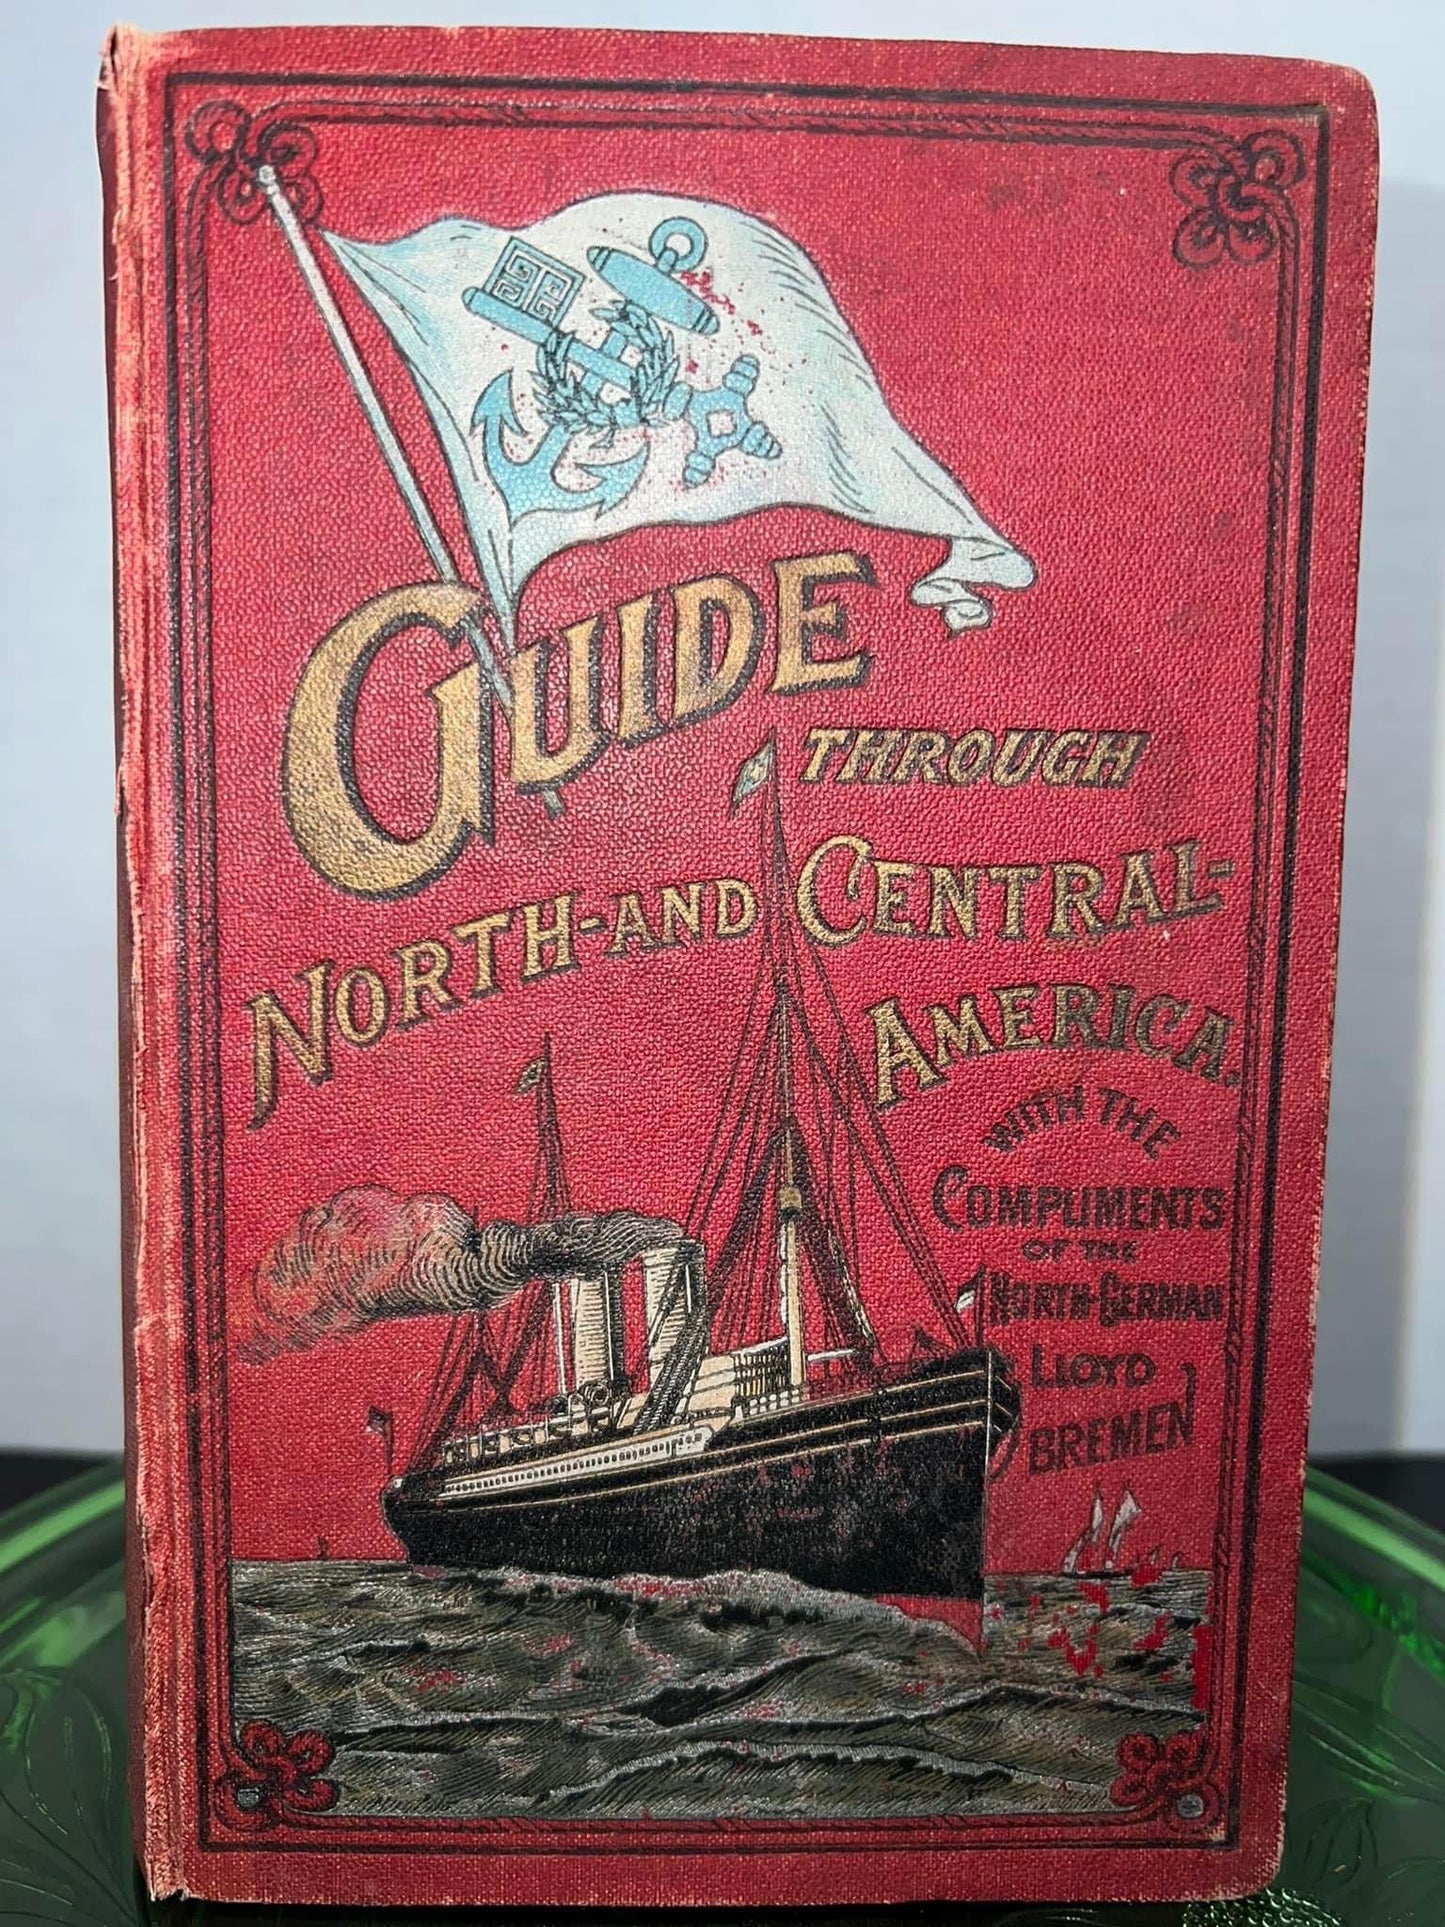 Antique Victorian travel 1898

Guide through north and Central America

Compliments of the north German Lloyd Bremen